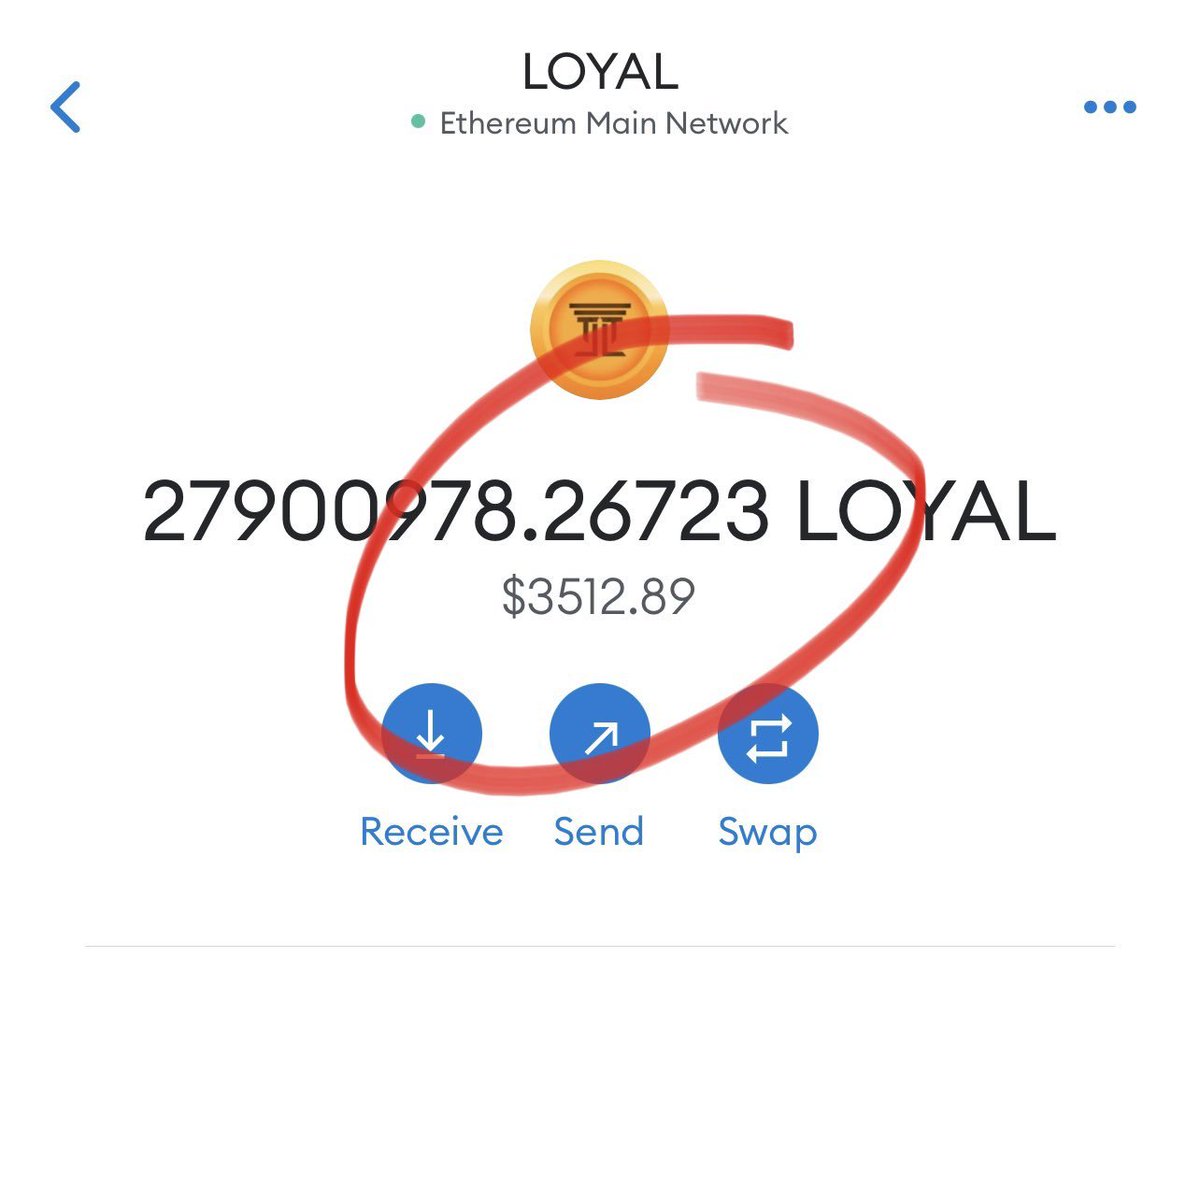 LISTEN UP WEB3. 👹

THE $LOYAL AIRDROP IS NOW LIVE, WAITING TO BE CLAIMED.

🔗 loyalty.holdings

#memecoin $LTC #LOYAL $PEPE $MATIC $PSYOP #MATIC $FINALE $BEN #BEN #HODL $FLOKI $SUI $HEX $CAPO $TSUKA #WWDC23 #cryptocurrency #Oculus #REFUND $MONG $LINK #4TOKEN #binance